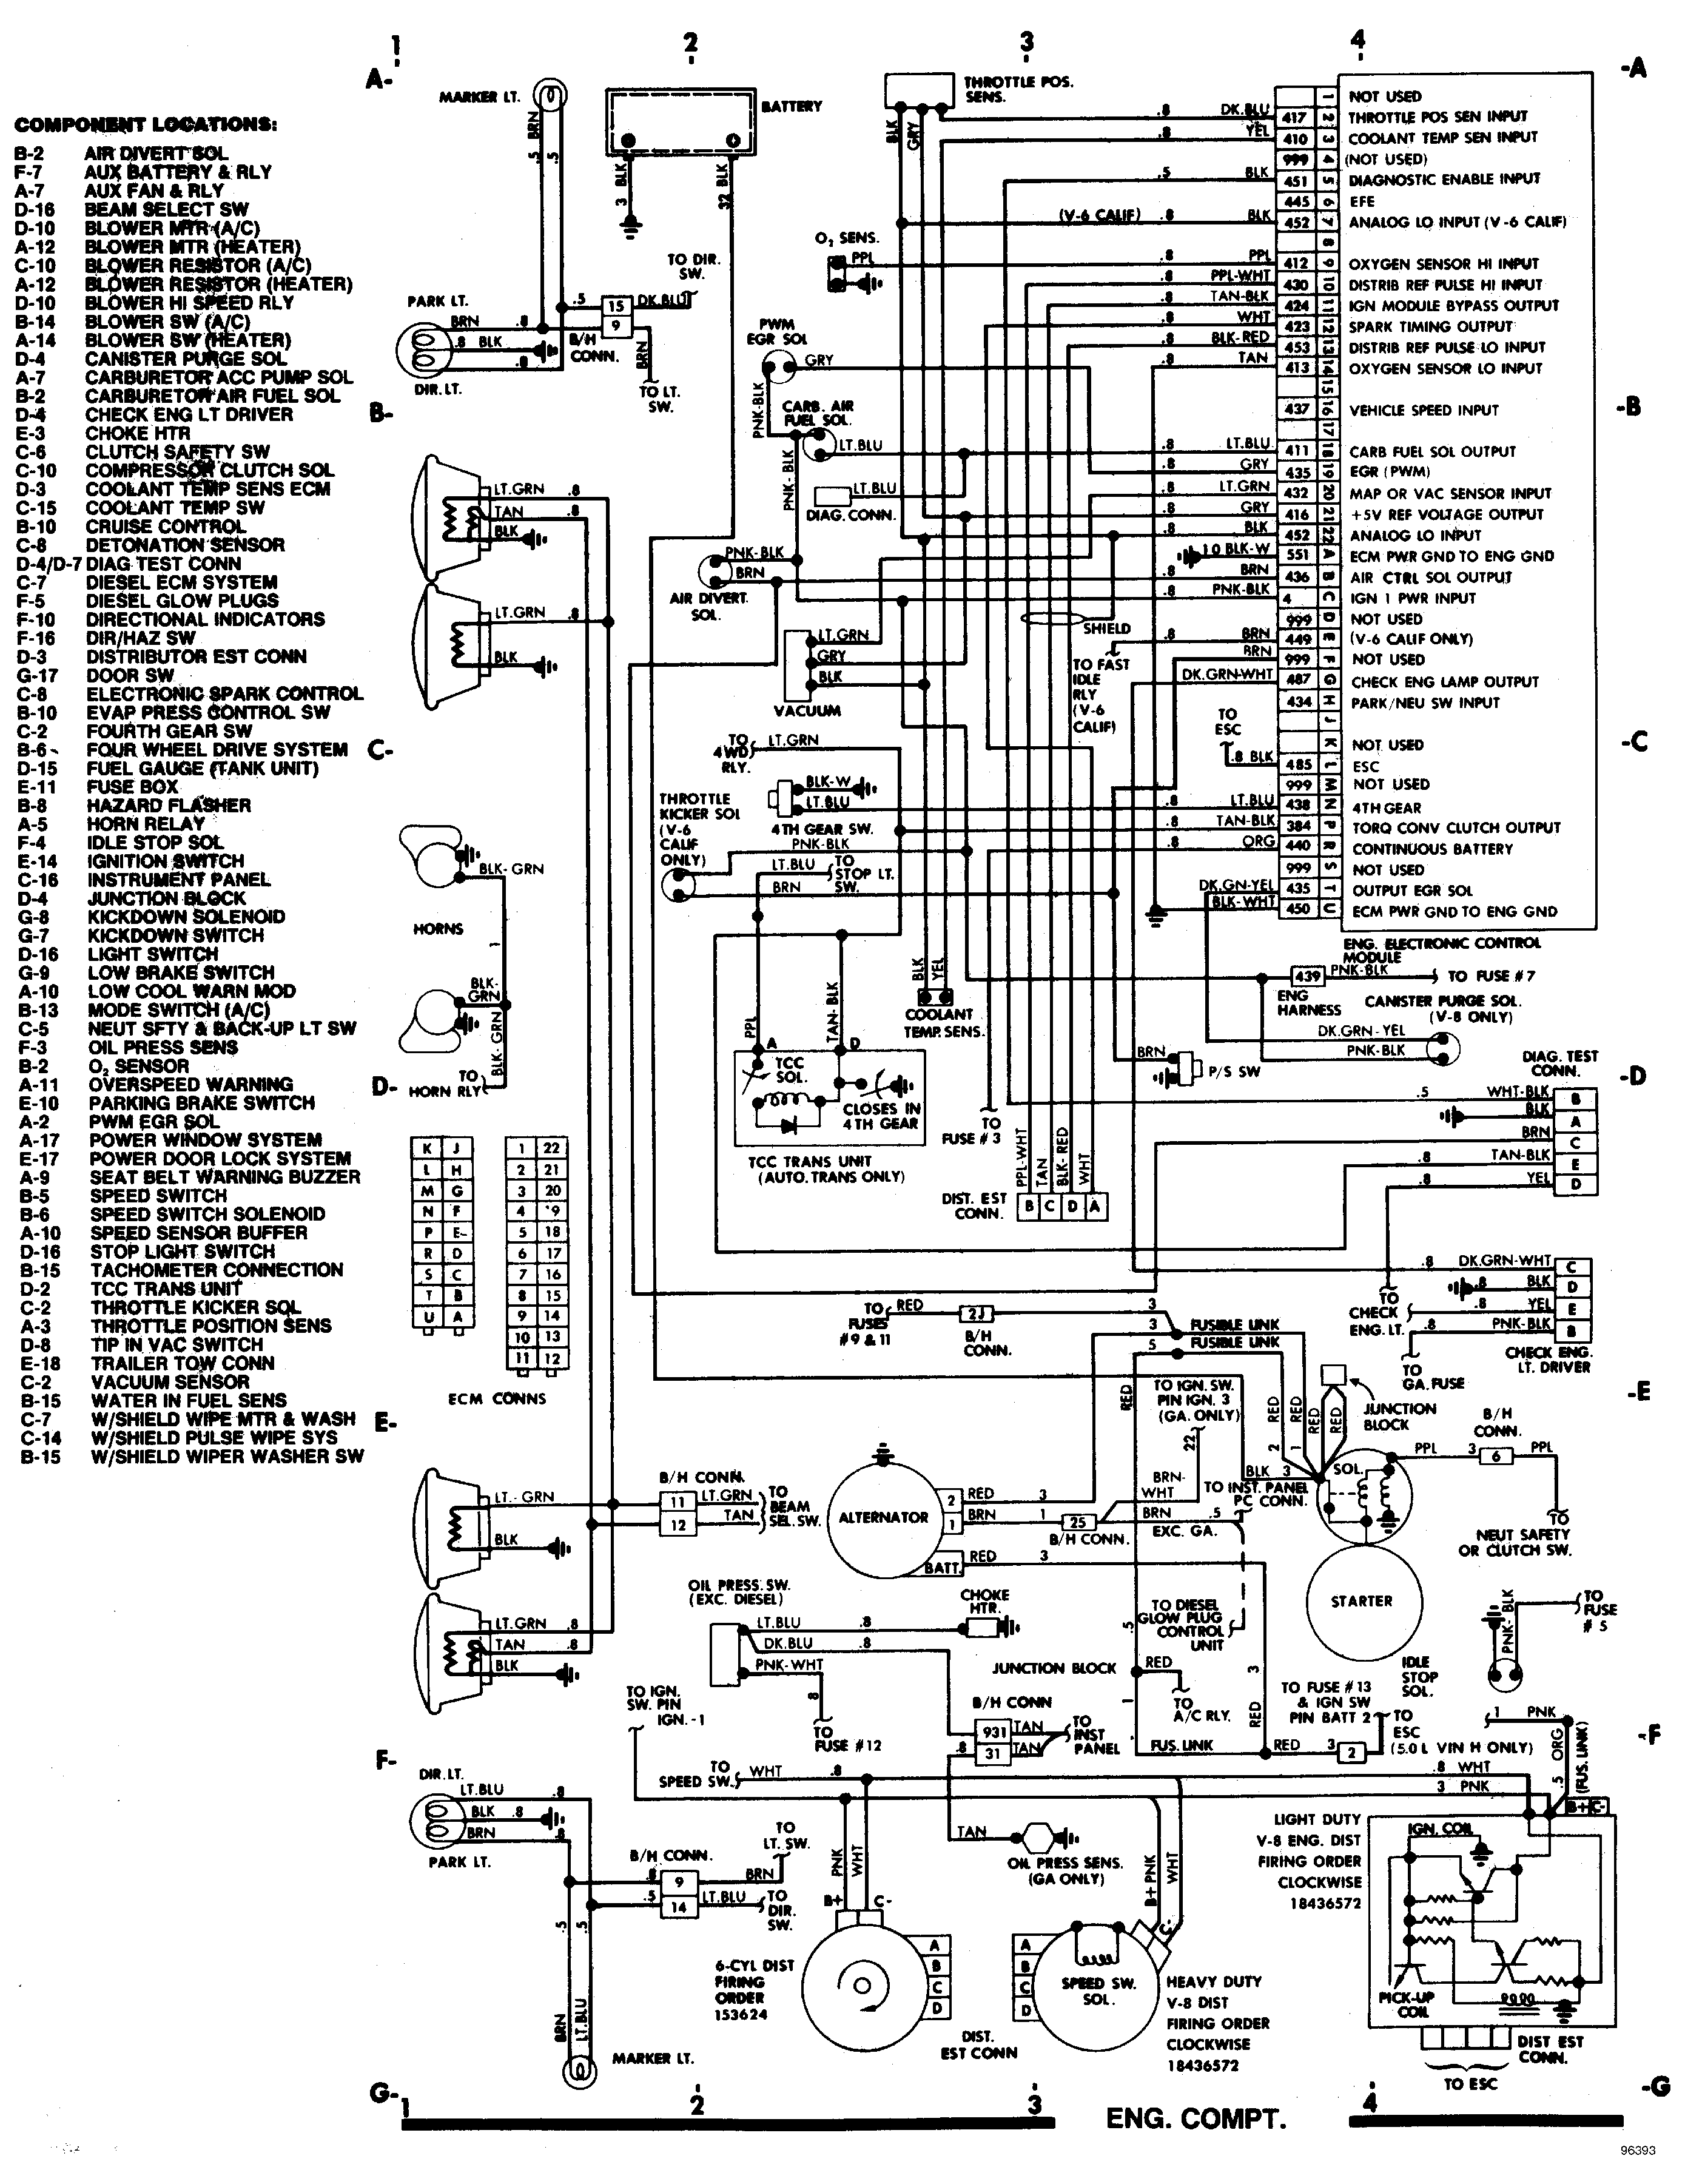 wiring diagram for 94 camaro 5.7 ignition switch to coil